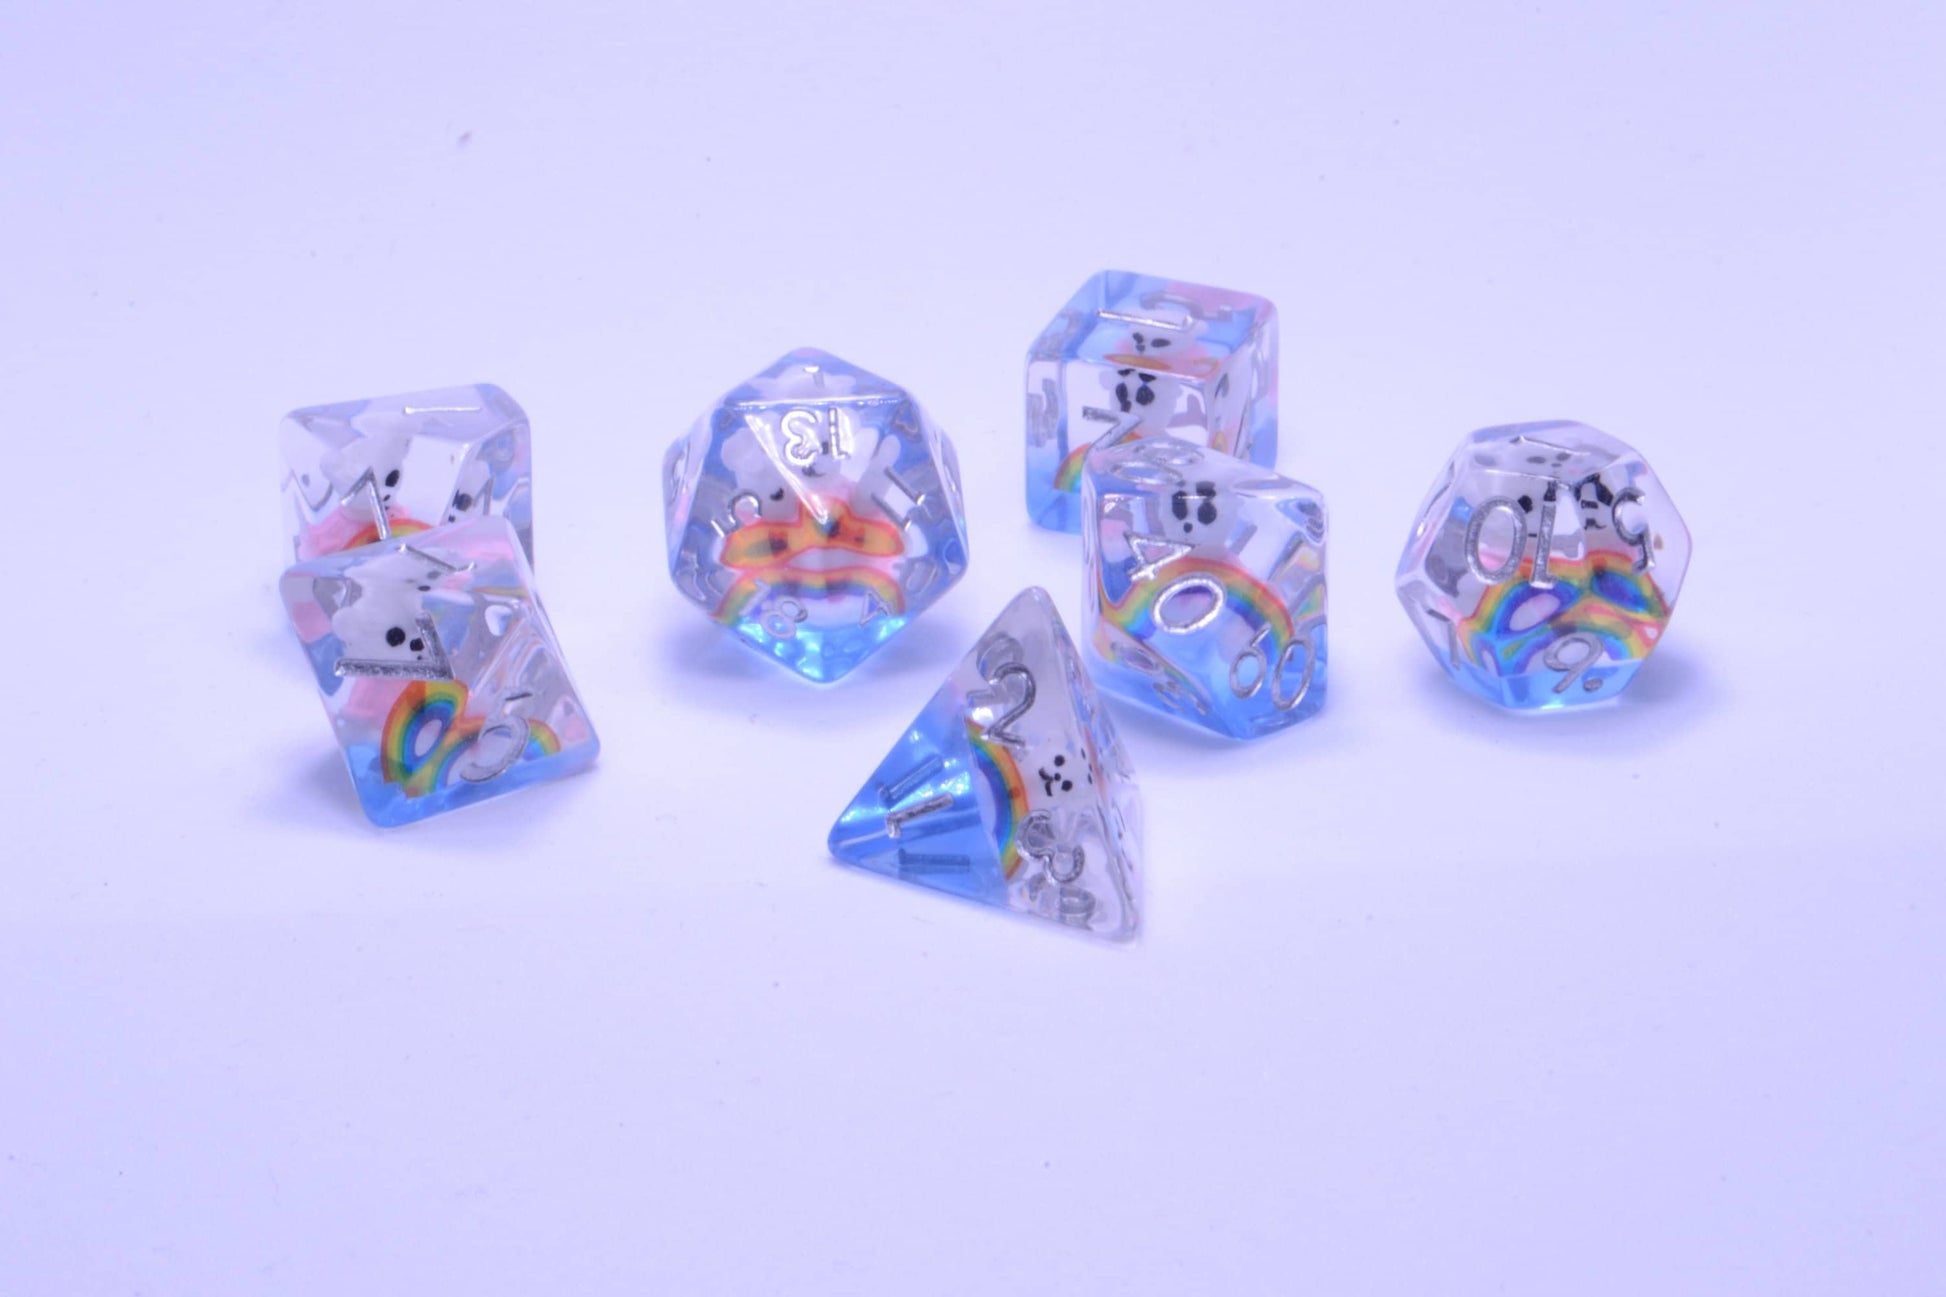 Rainbow Love - A Cute Teddy Bear Encased Soft Edge Resin D&D Dice Set With Silver Numbering - For Dungeons and Dragons - Gift Set